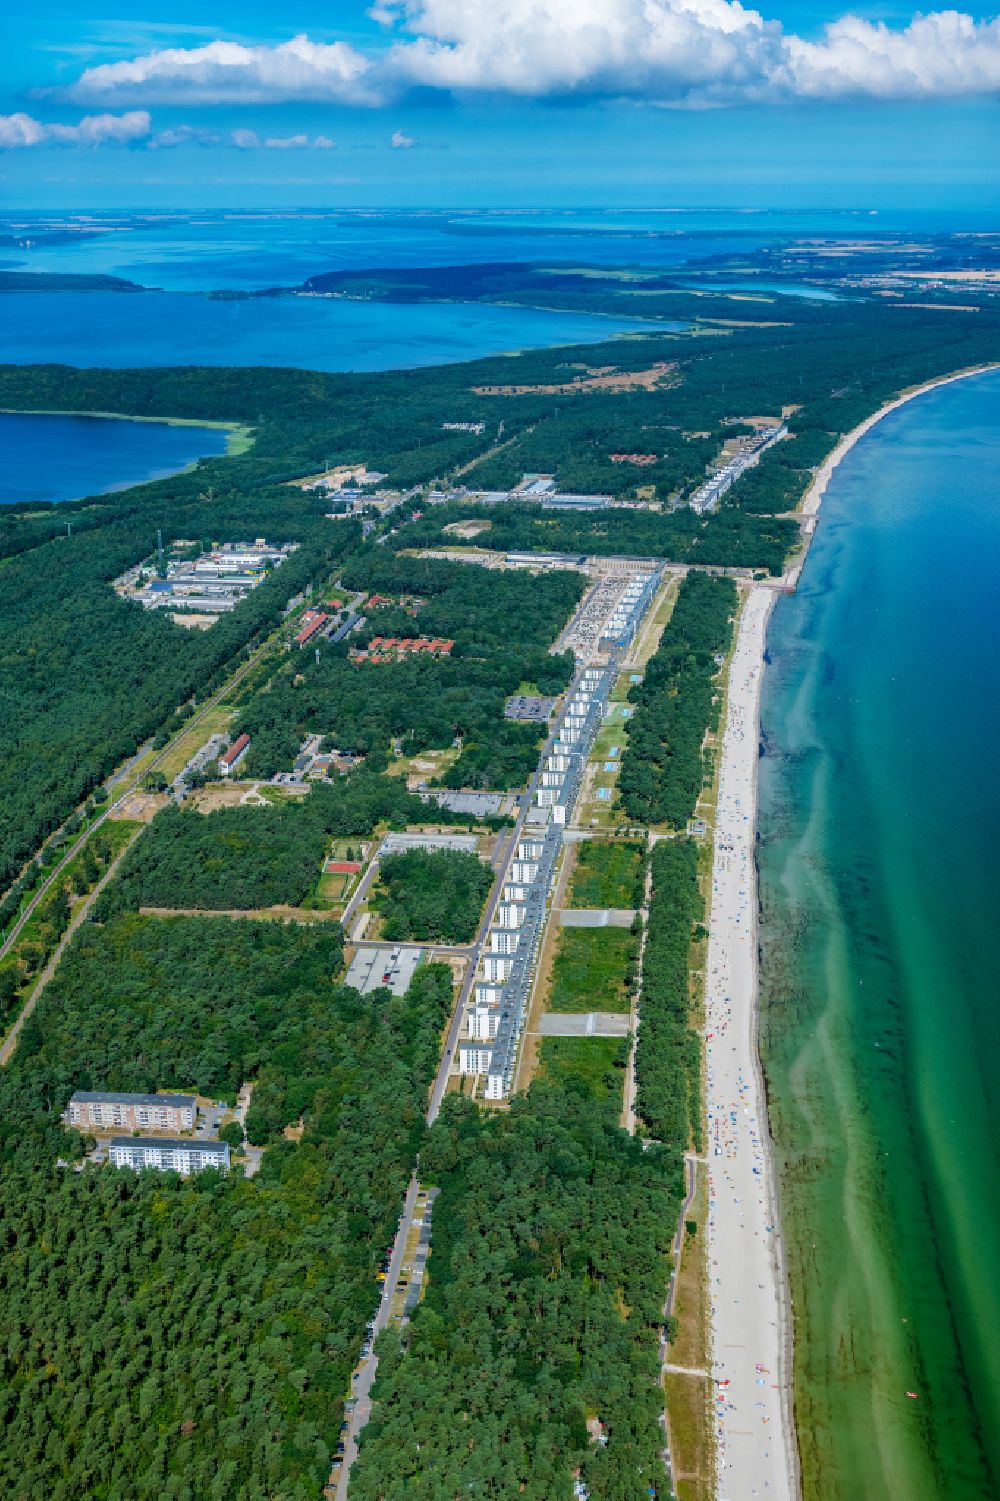 Prora from the bird's eye view: Building complex of the former military barracks Koloss von Prora in Prora in the state Mecklenburg - Western Pomerania